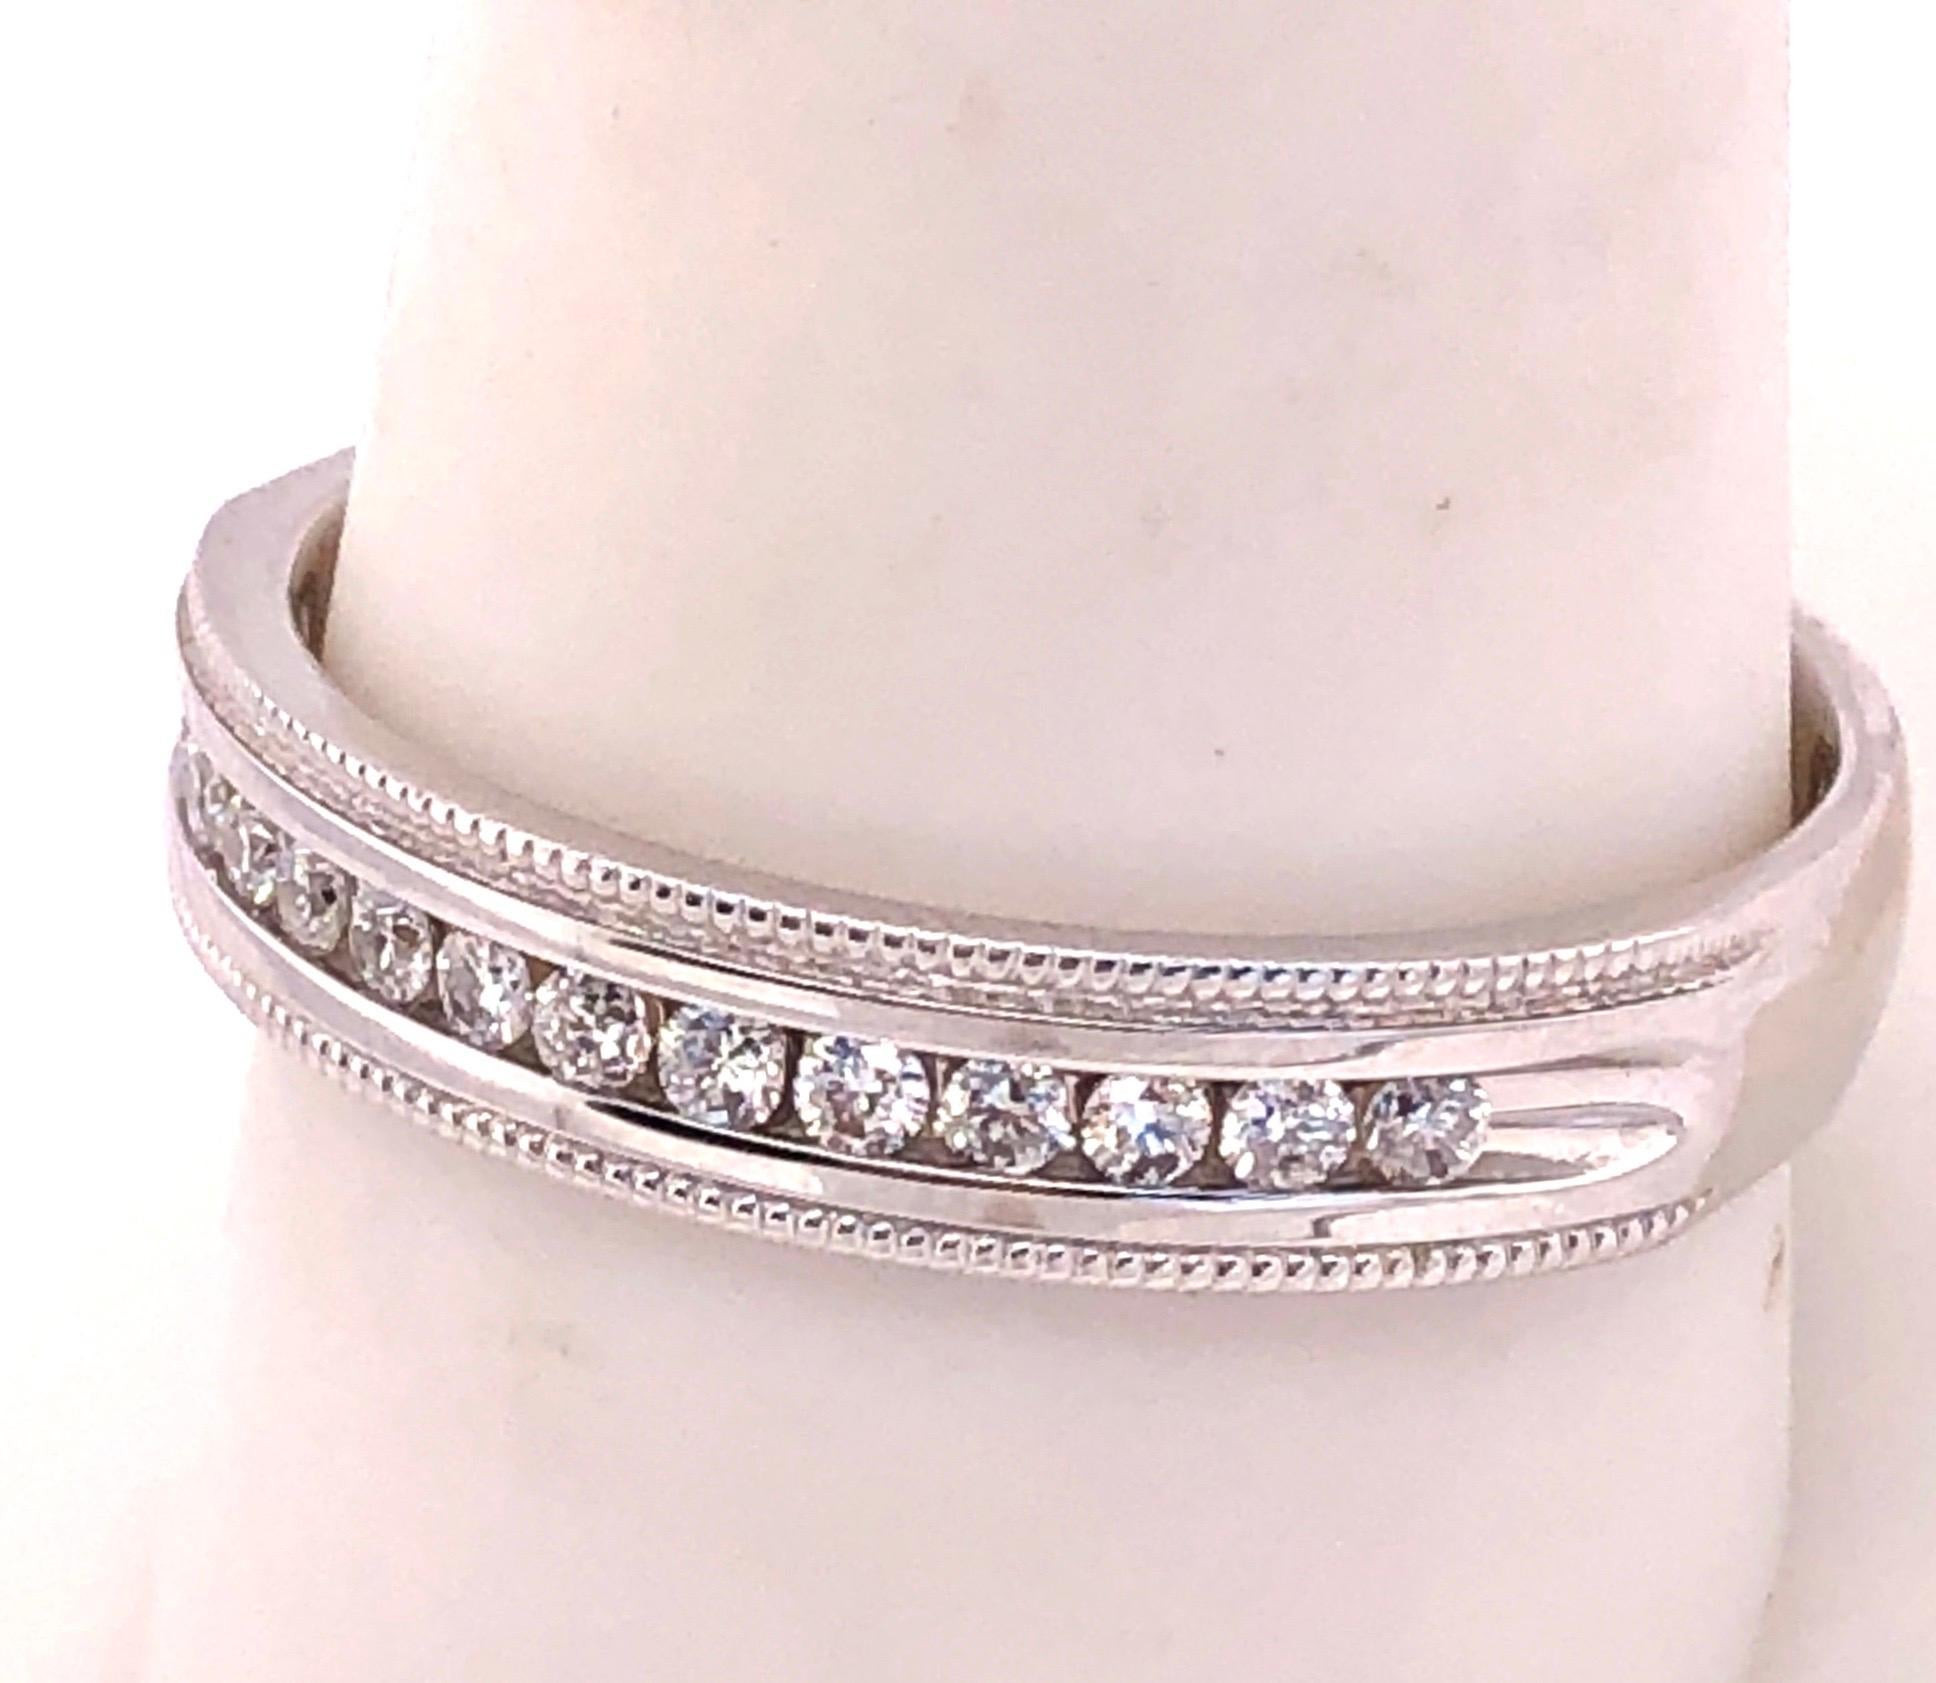 14Kt White Gold Band Ring with Diamonds  0.25 Total Diamond Weight
Size 10.25 with 4.99 grams total weight